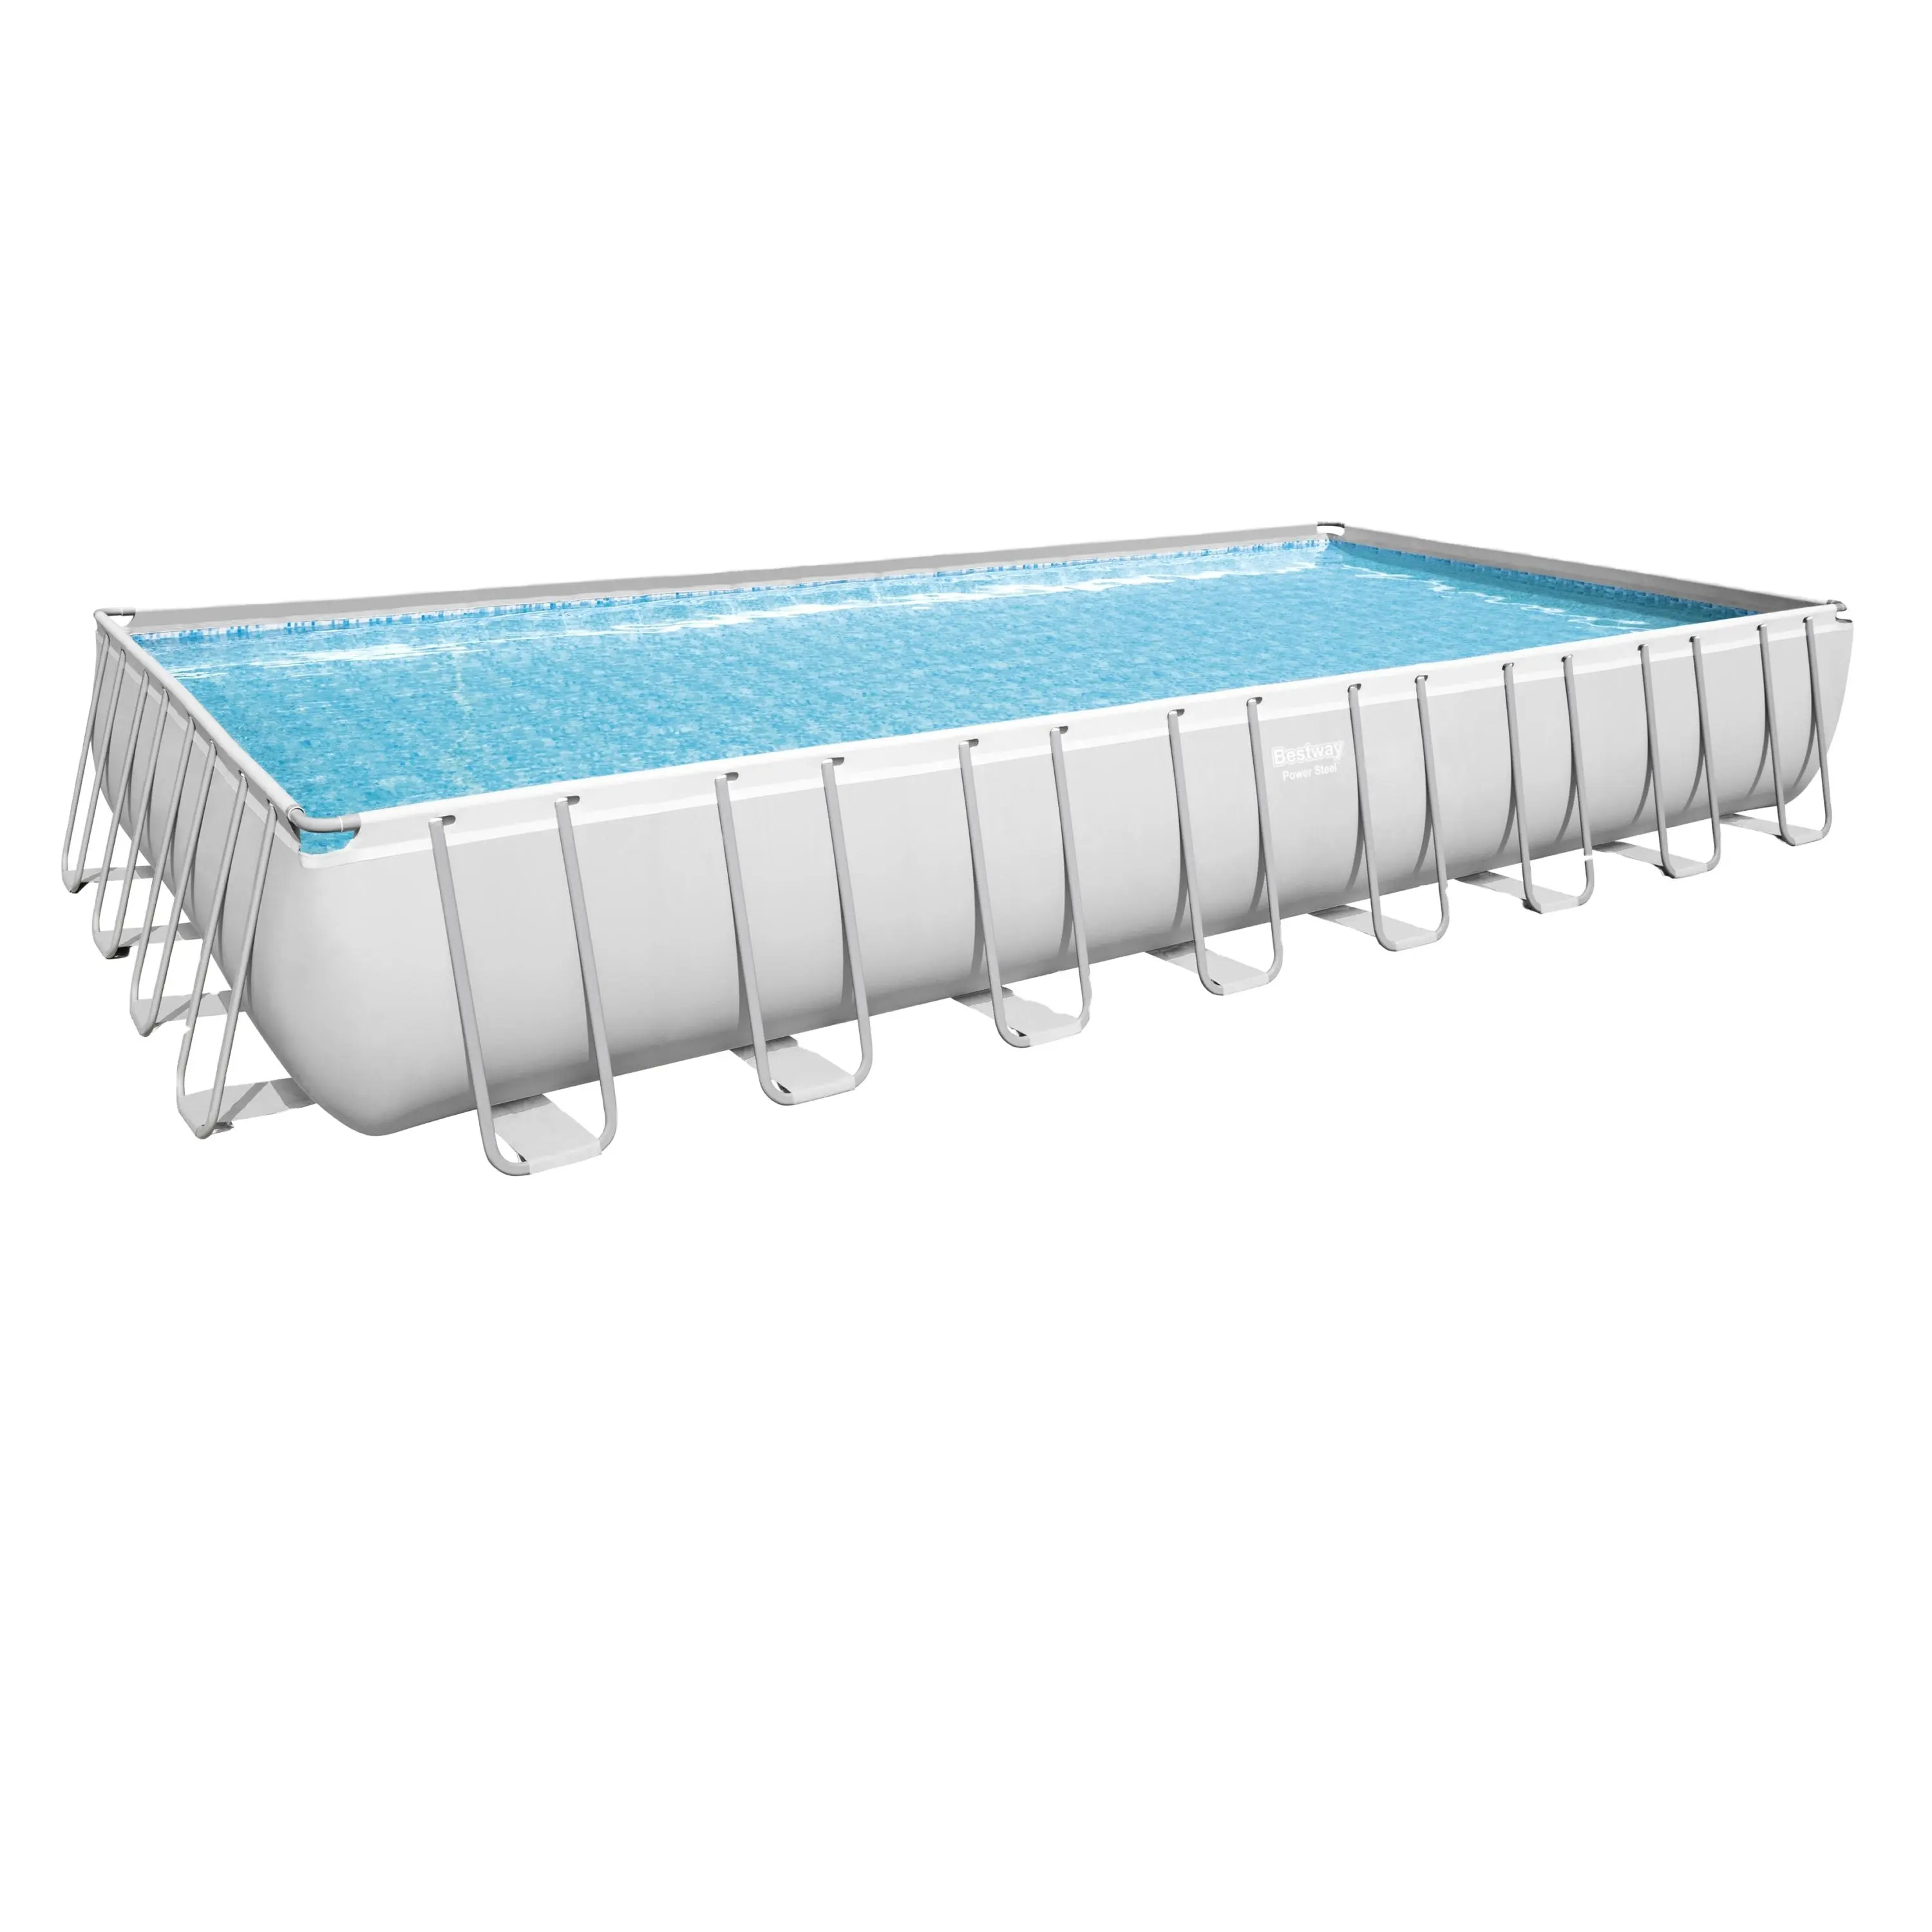 the most biggest swimming pool size 956*488*132cm item 56623 with filter pump,ladder ,cover